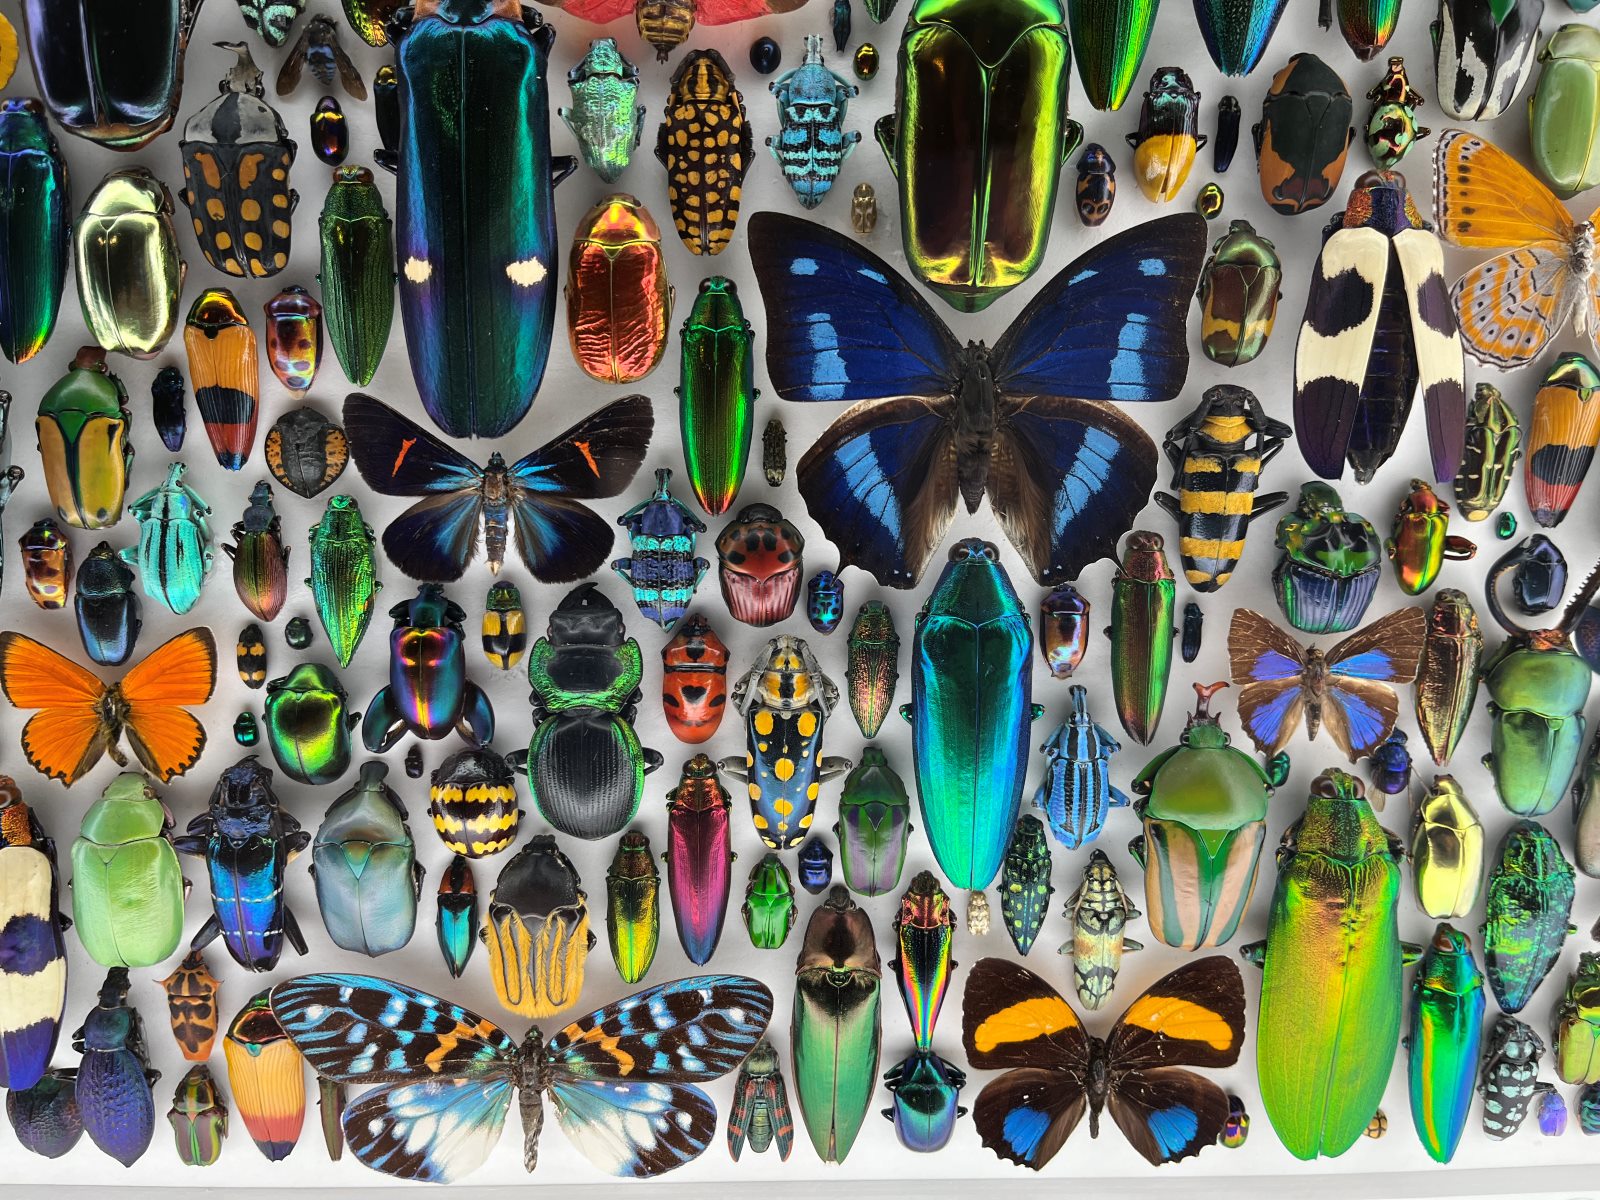 A mosaic made up of brightly colored insects and butterflies